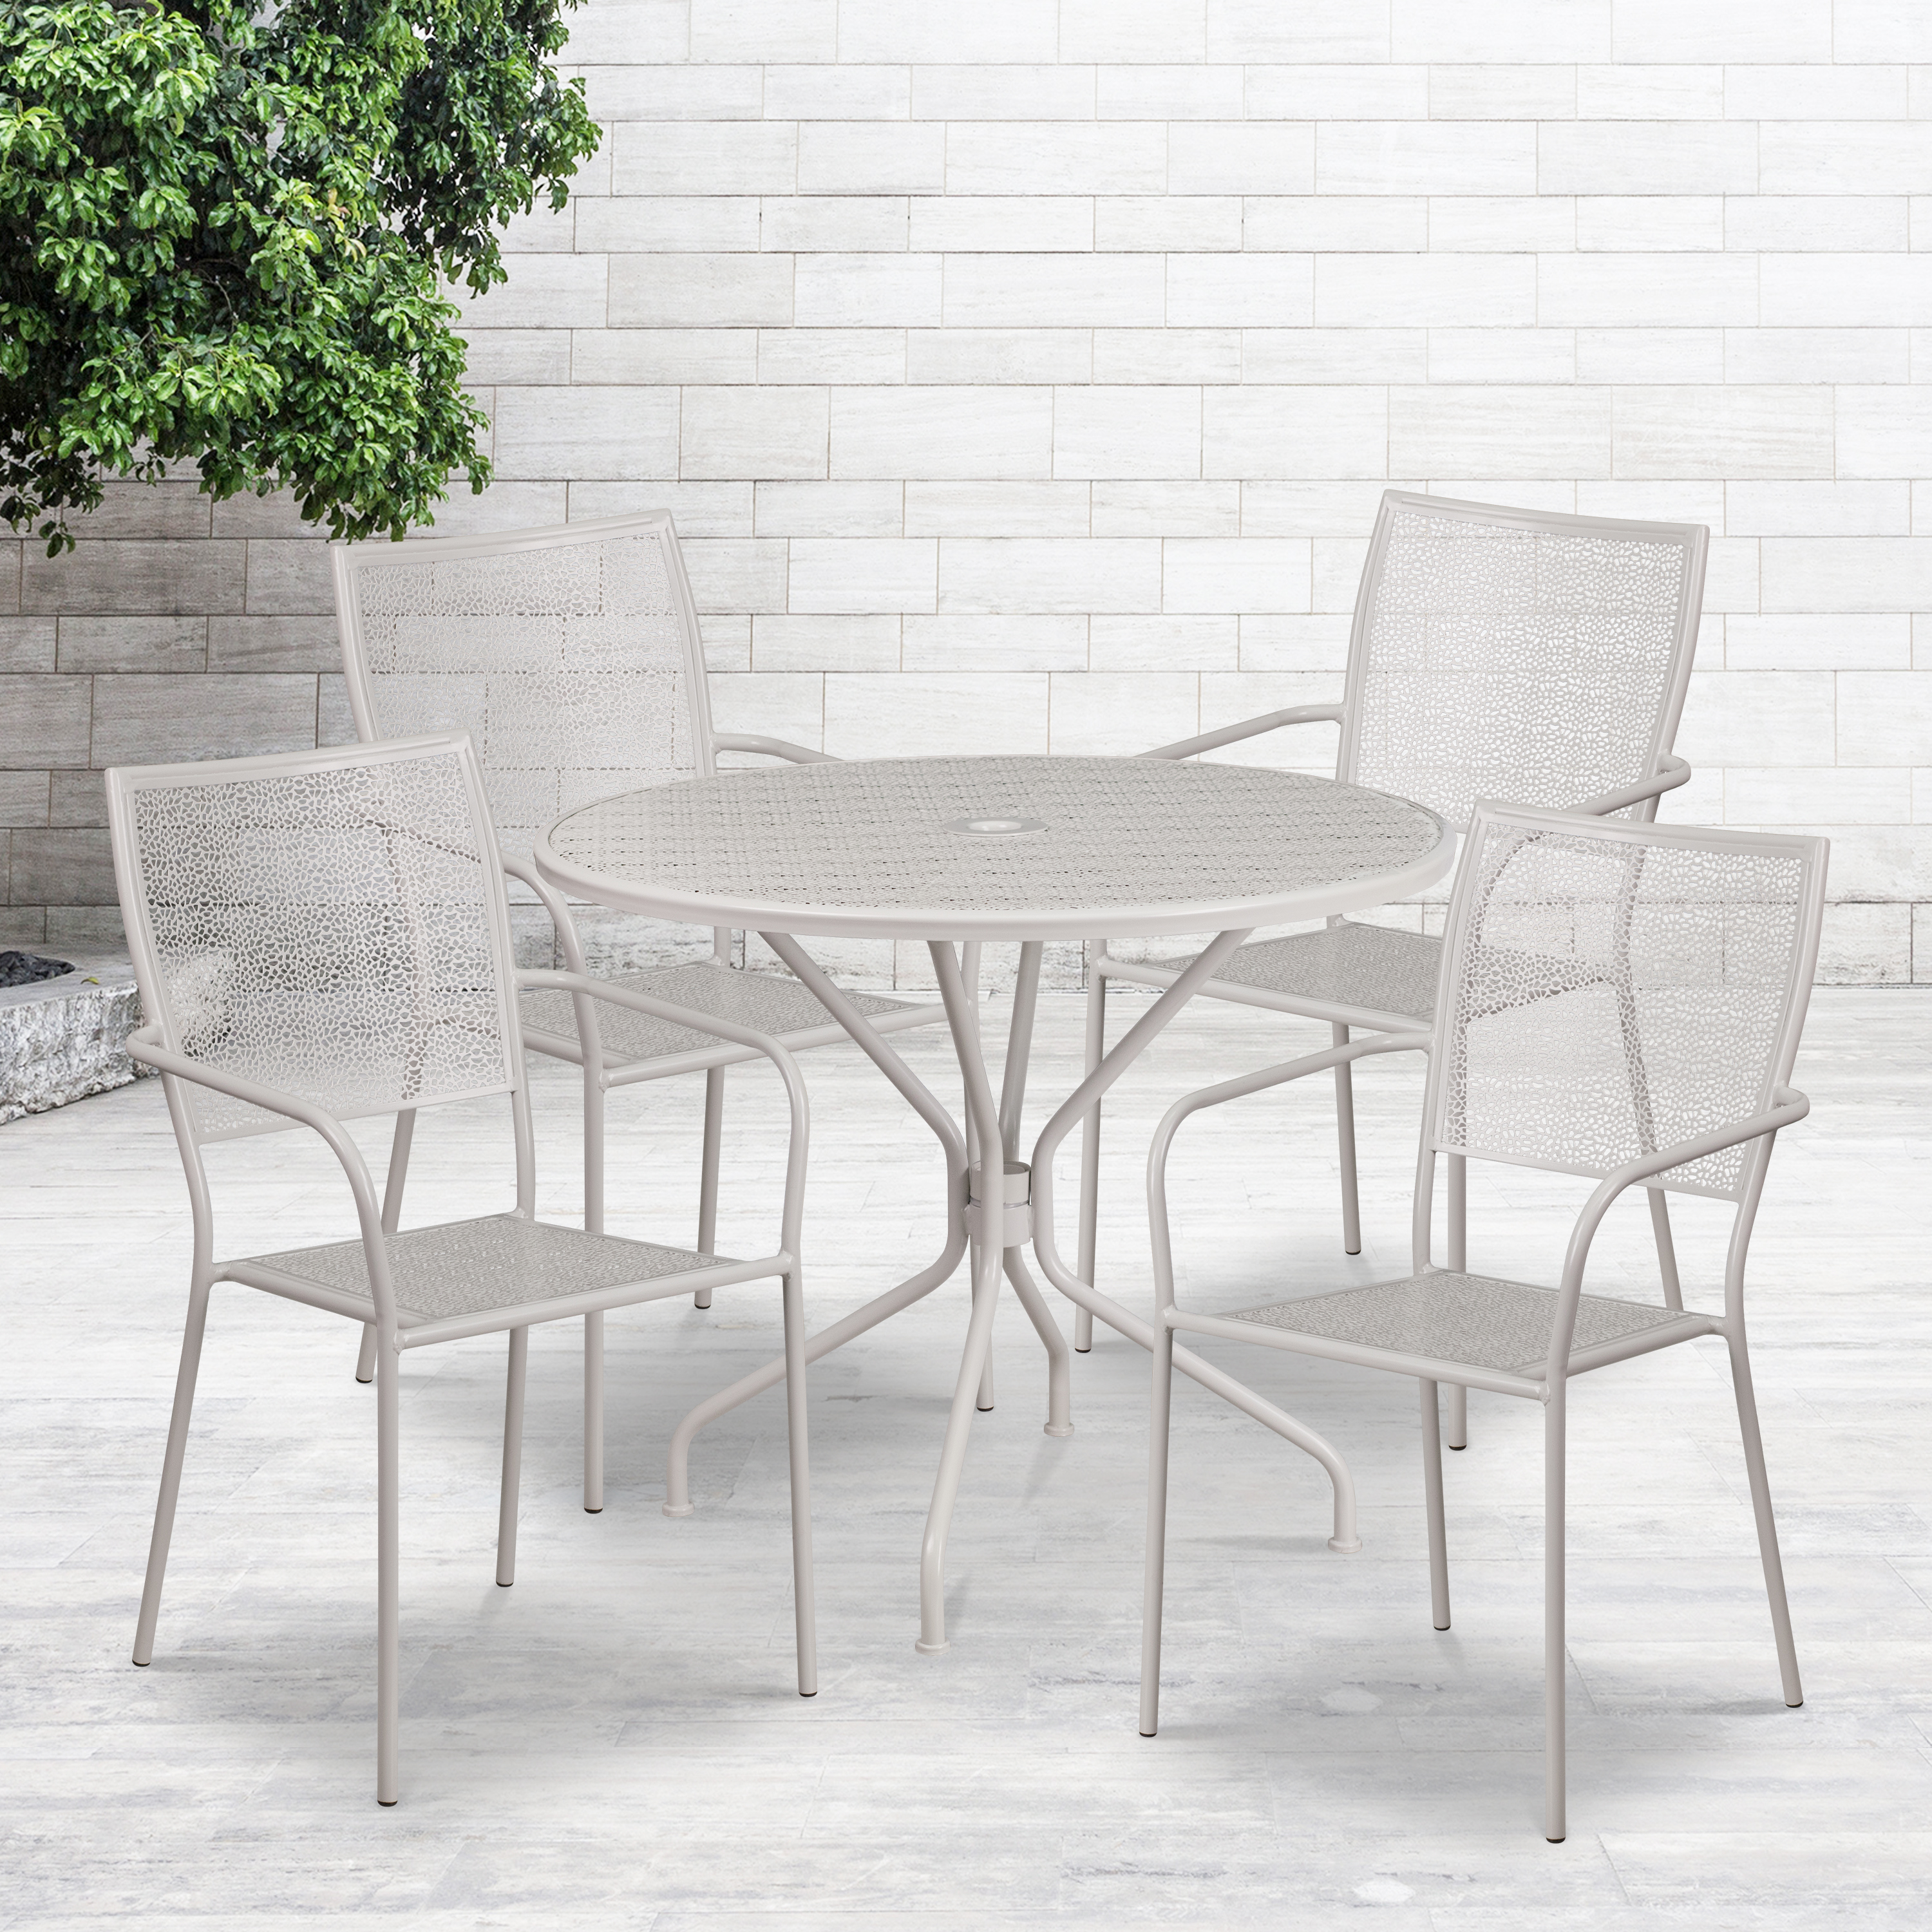 Flash Furniture Commercial Grade 35.25" Round Light Gray Indoor-Outdoor Steel Patio Table Set with 4 Square Back Chairs - image 1 of 5